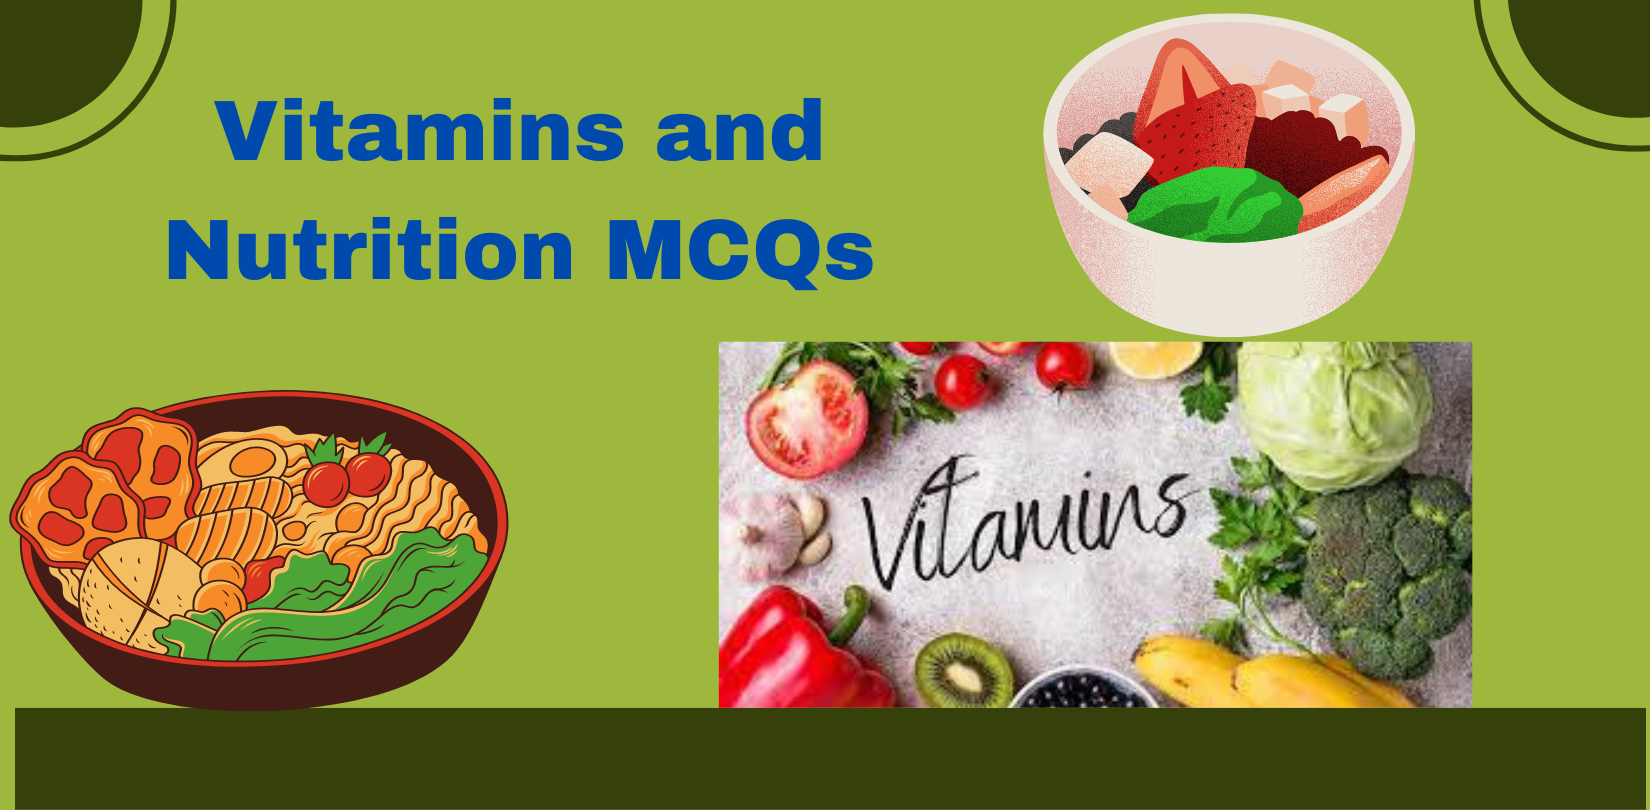 Vitamins and Nutrition MCQs